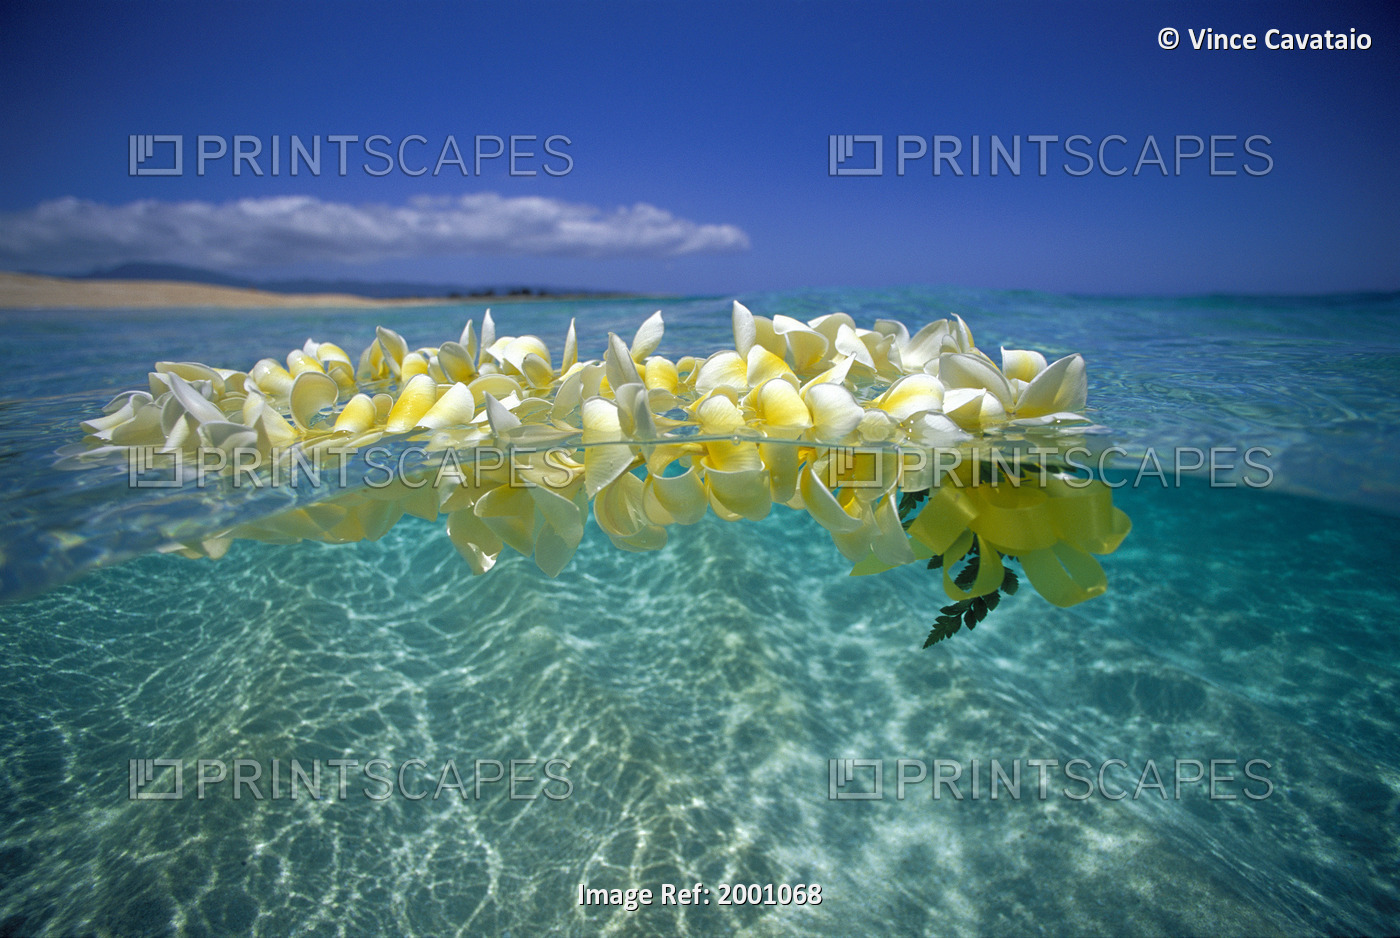 Over/Under Plumeria Lei Floating Ocean Surface Calm Turquoise Beach Distant ...